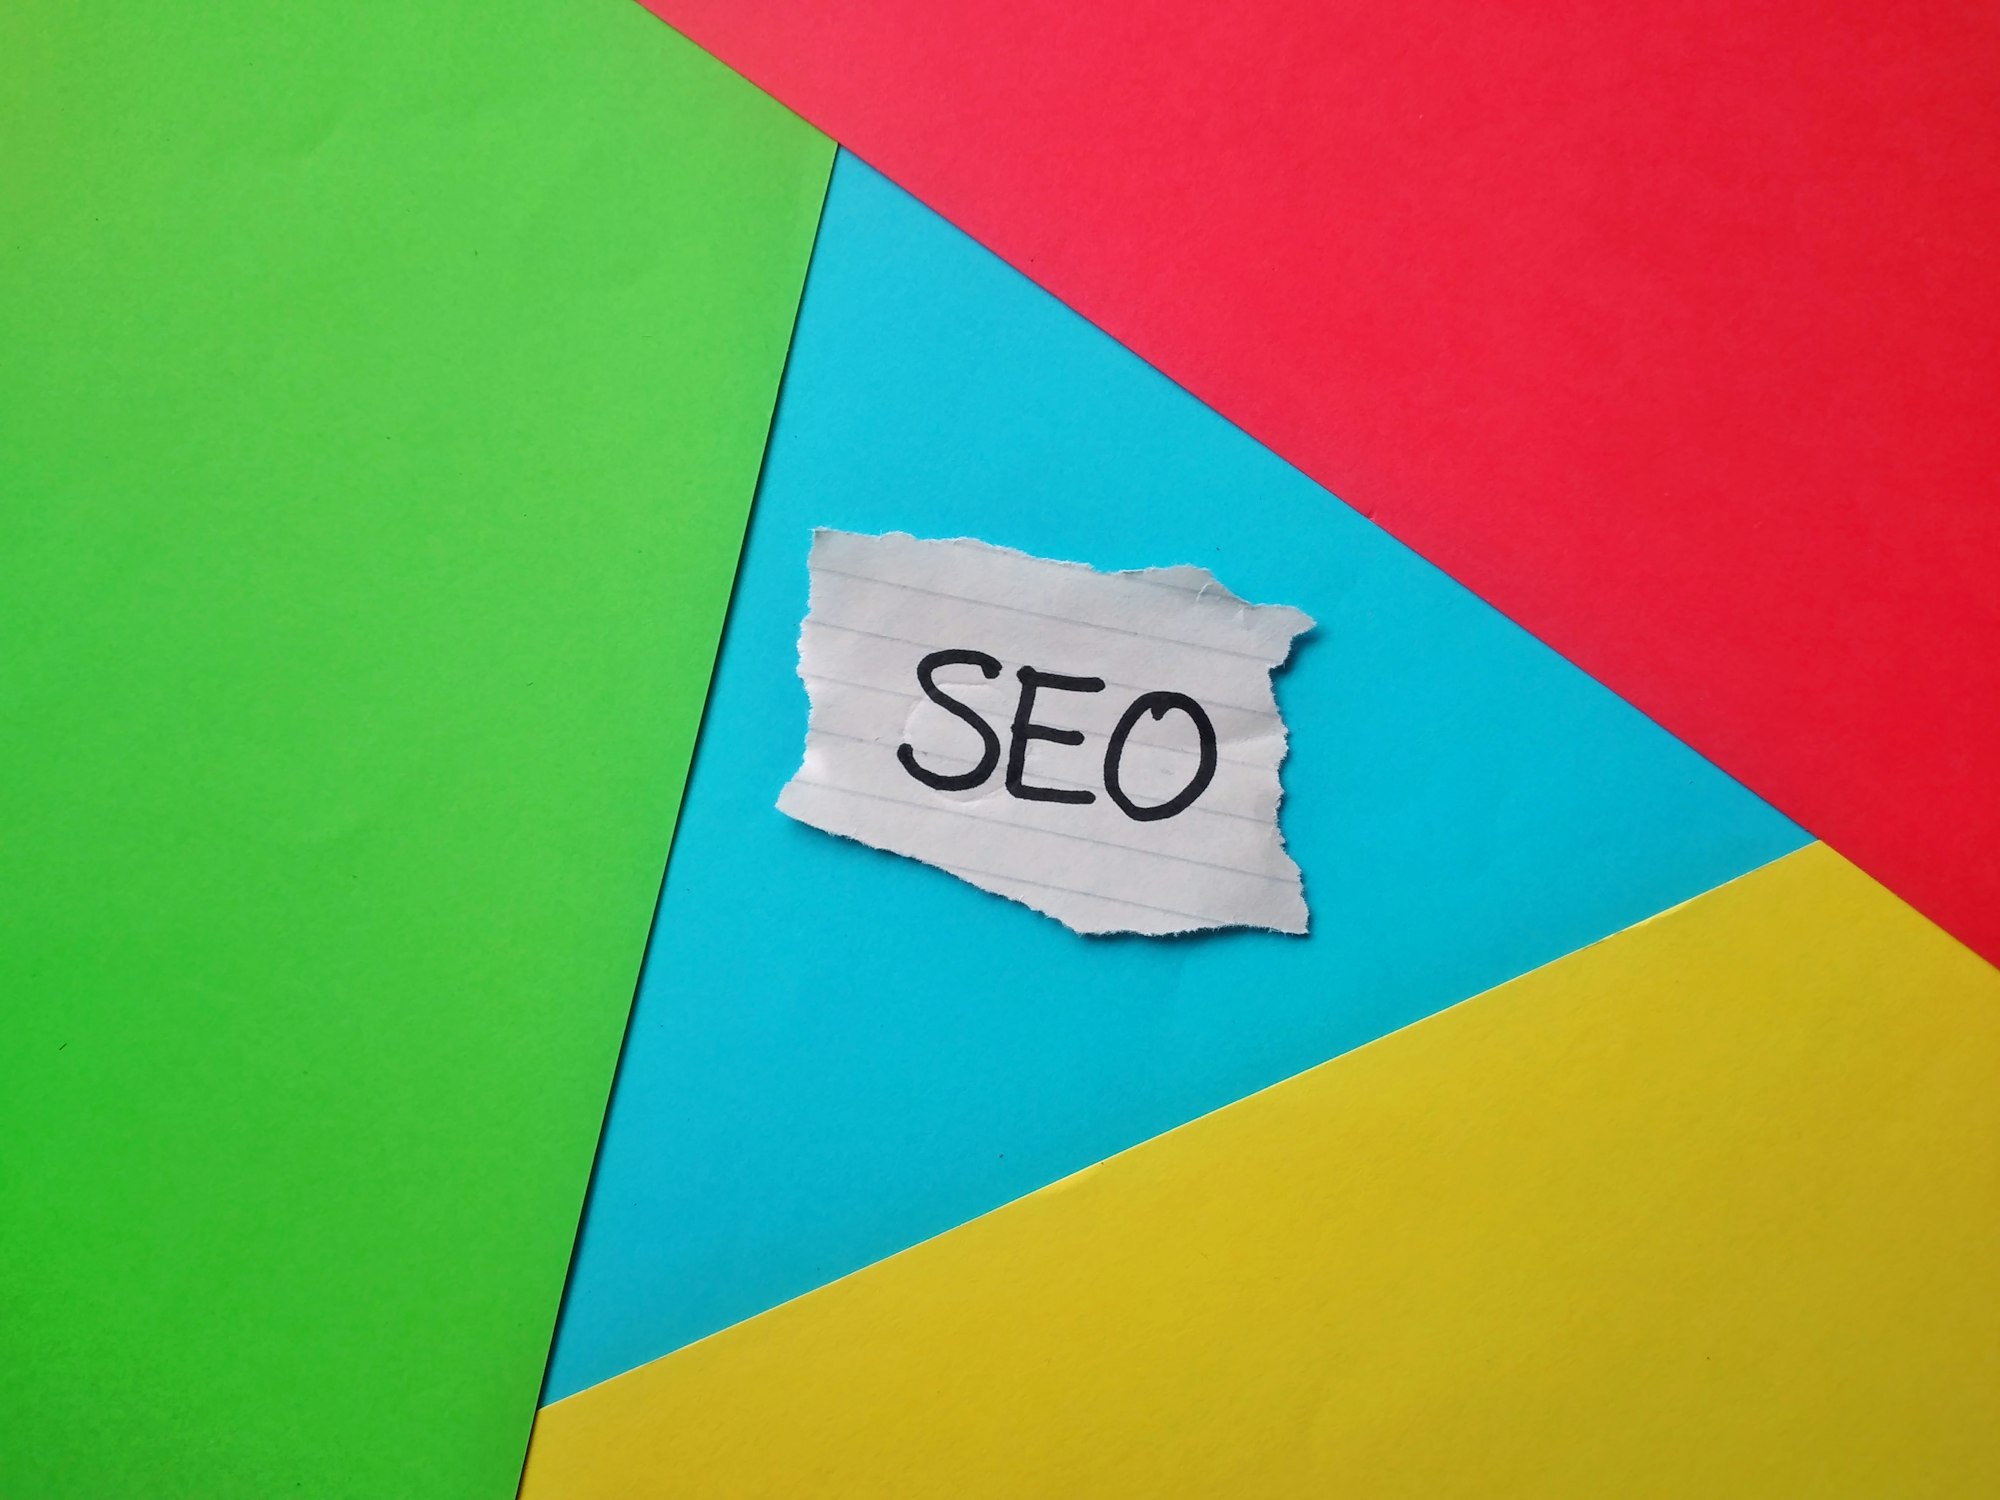 What is search engine optimization (SEO)? How to implement it on your website?